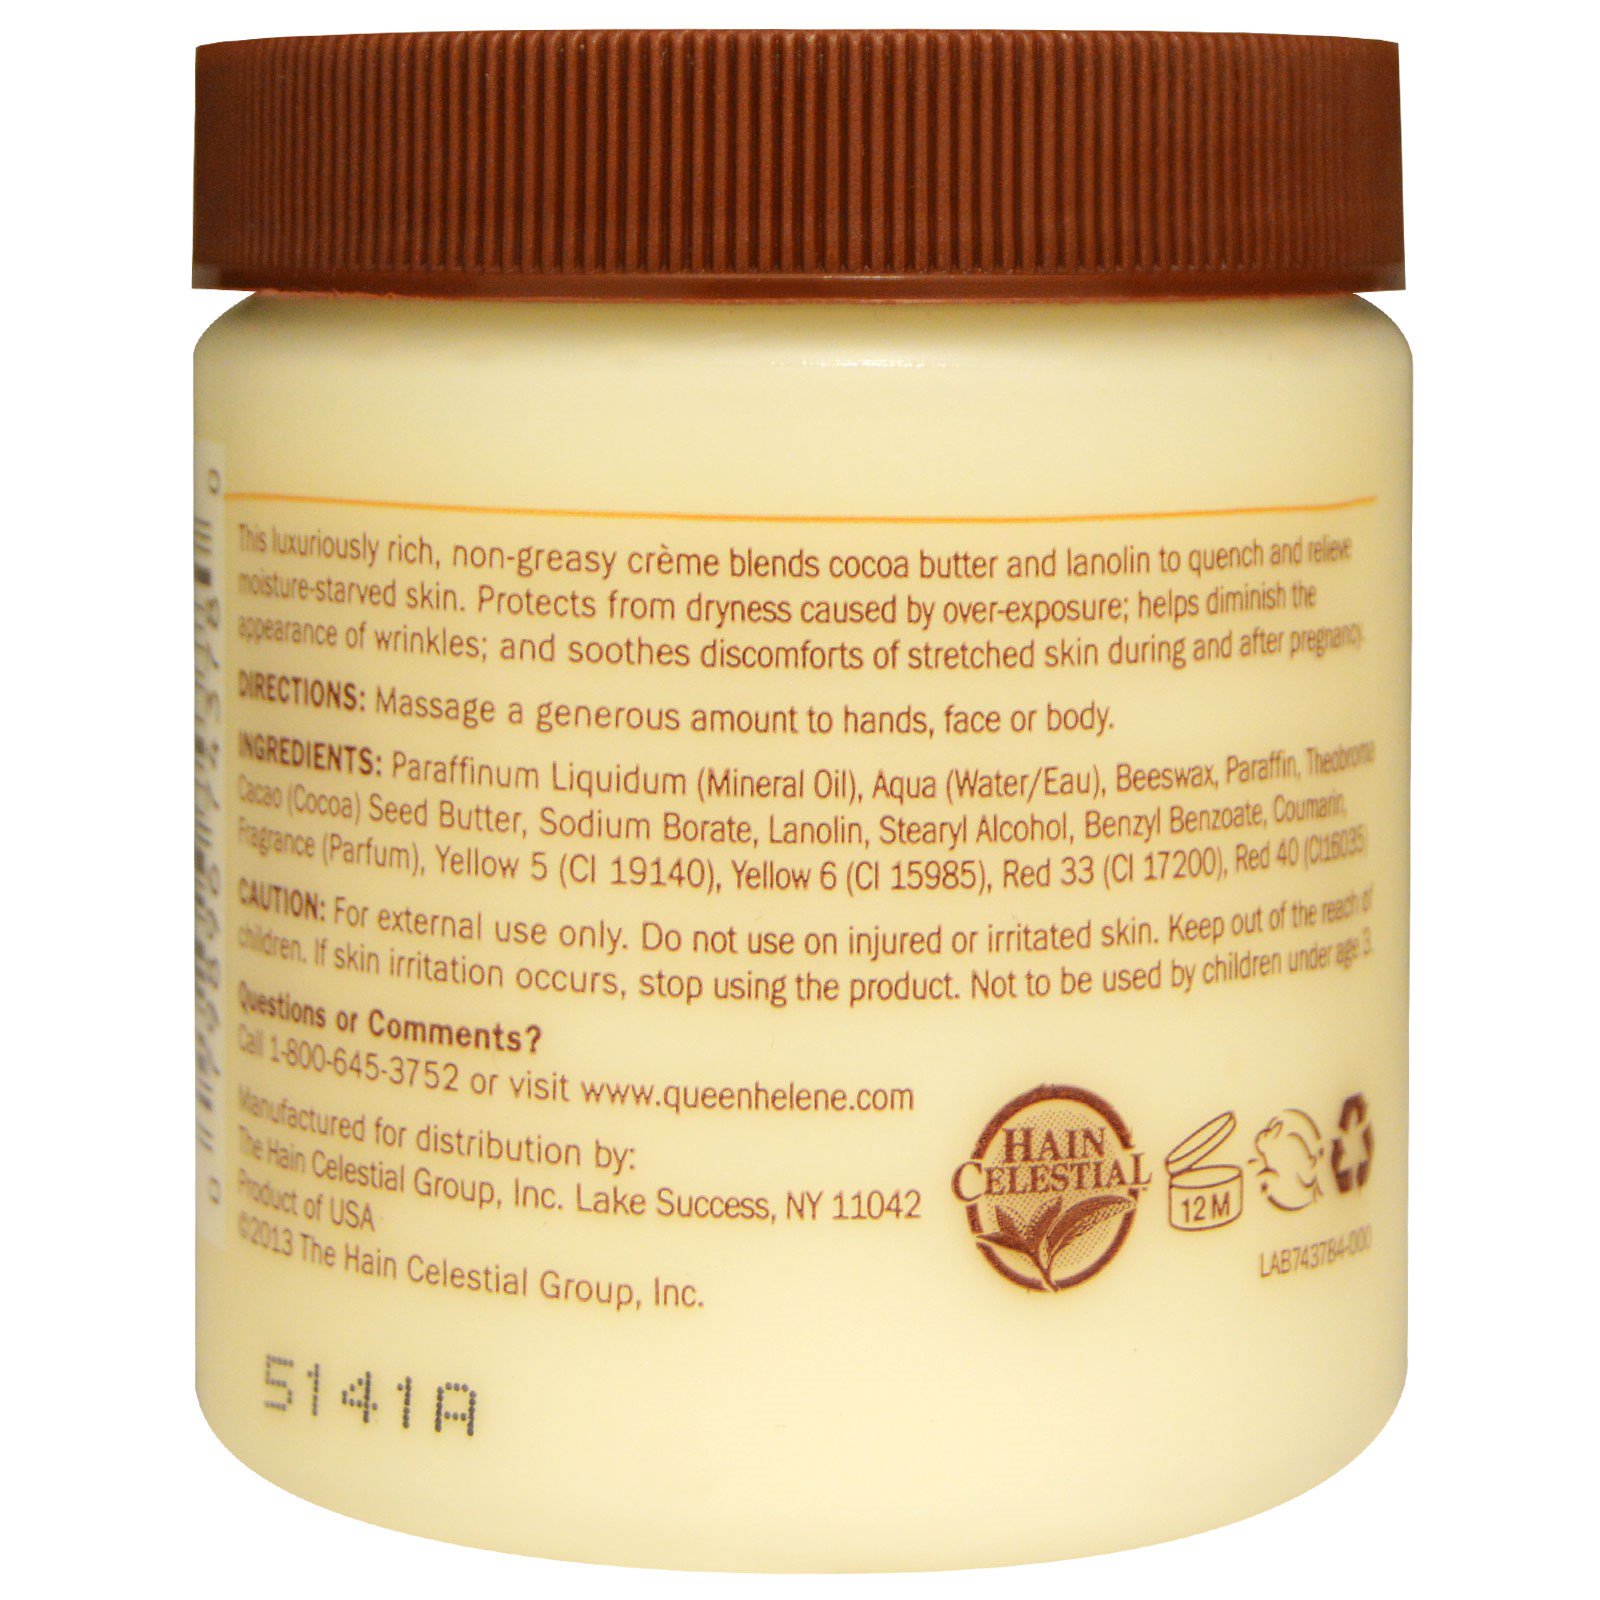 Queen Helene, Cocoa Butter Face + Body Creme, 4.8 oz (136 g) - iHerb